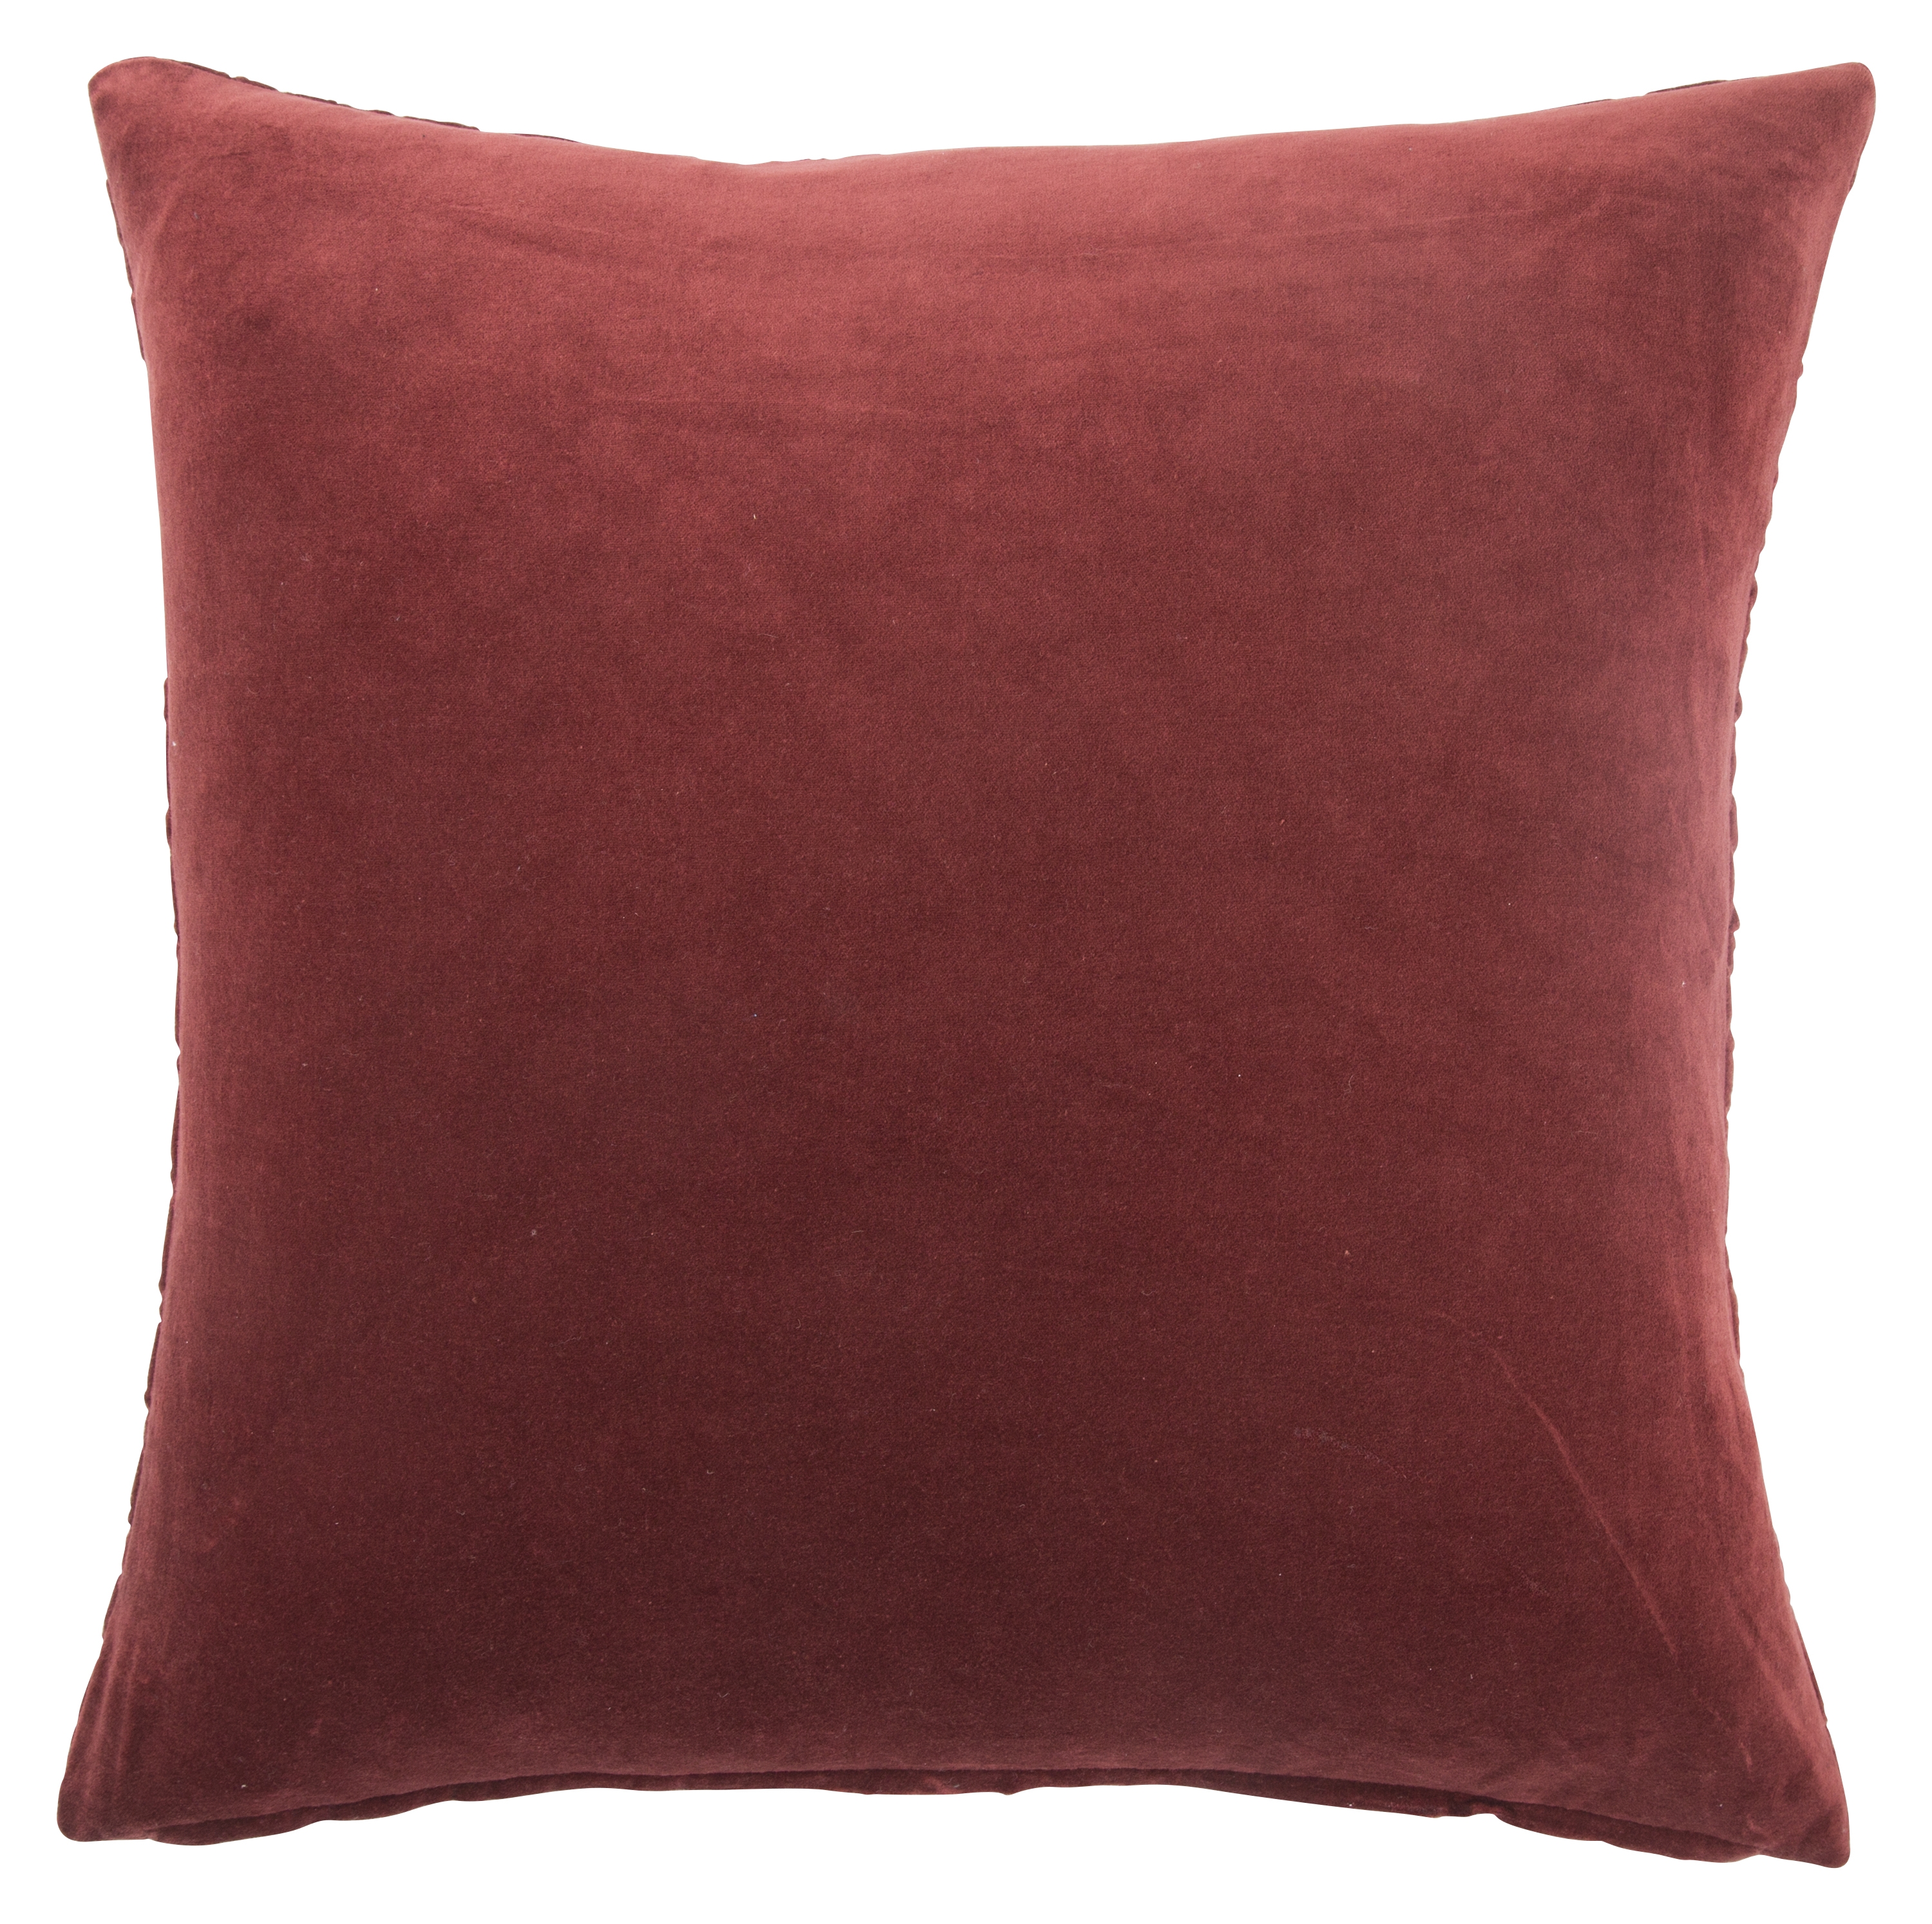 Design (US) Red 22"X22" Pillow w/ Poly Fill - Image 1